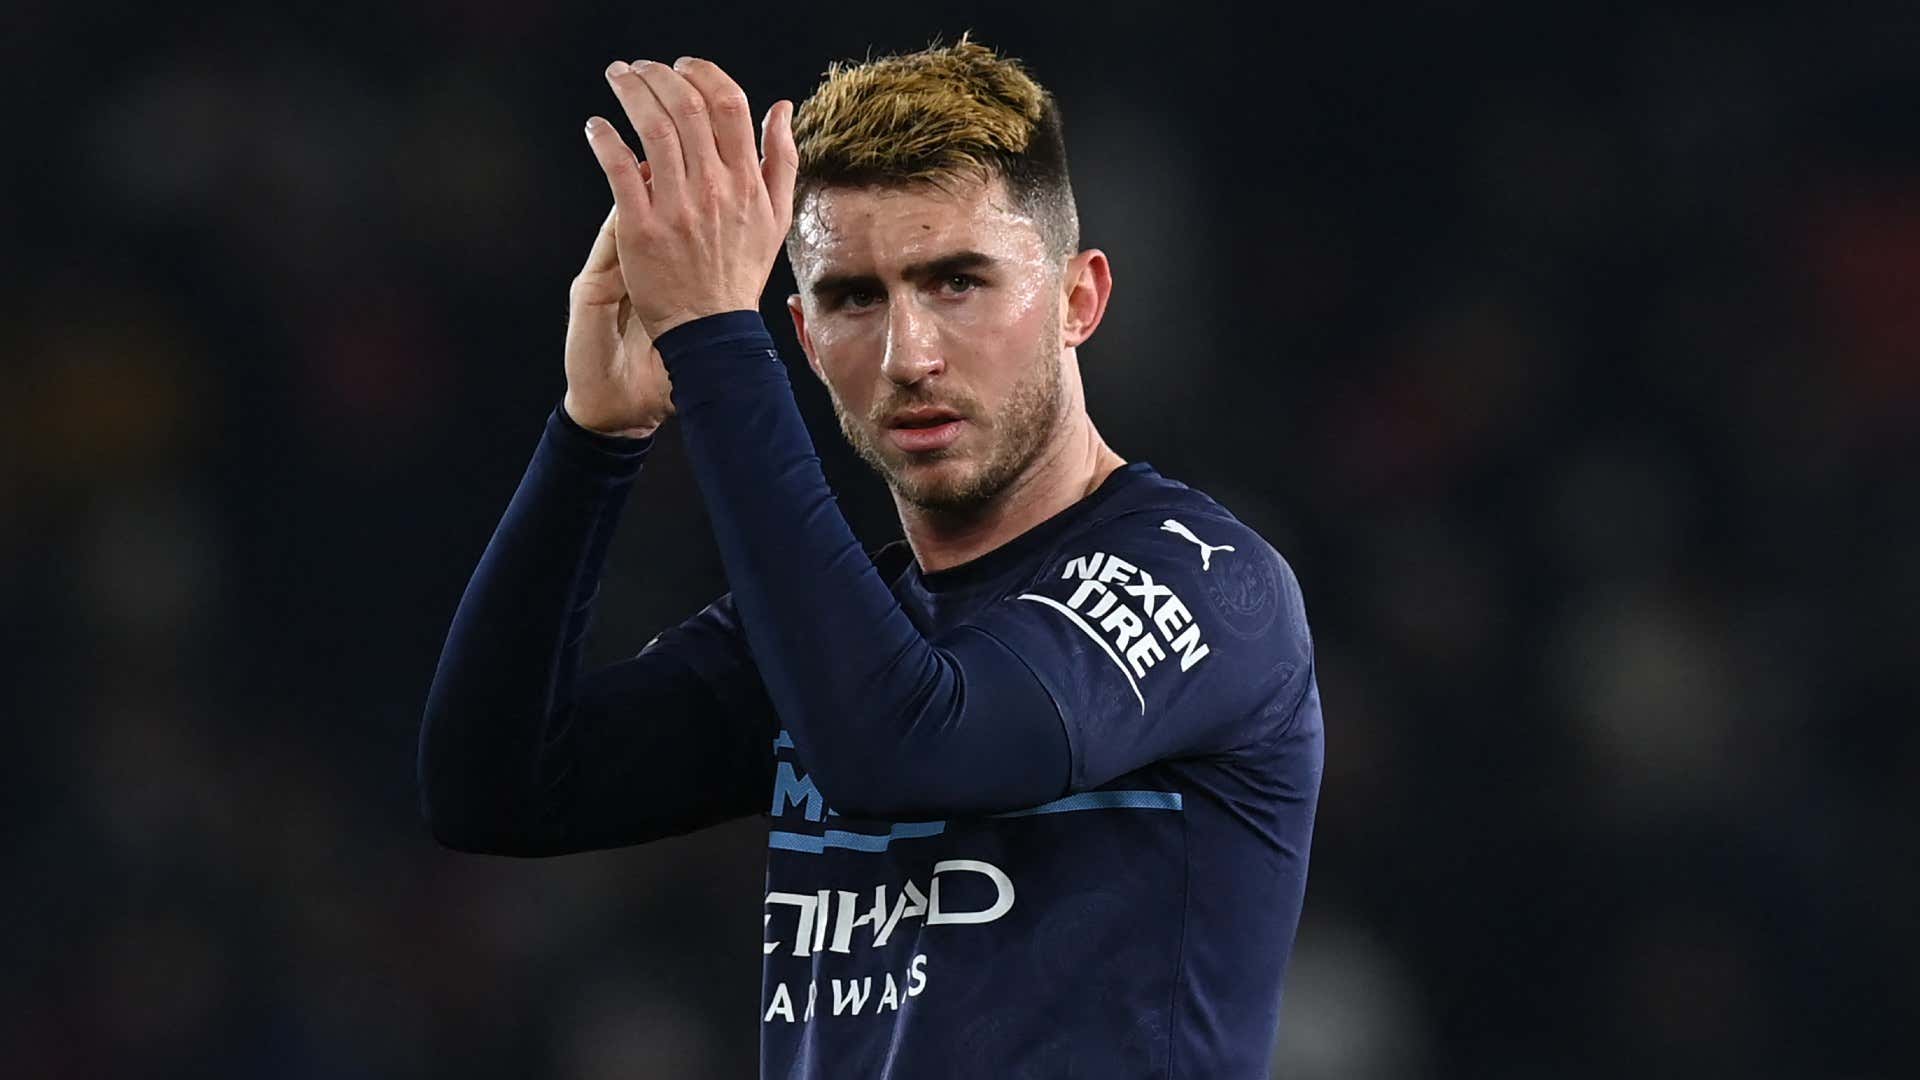 Laporte claims Southampton's 'small pitch' made it 'difficult' for Man City & then shows off nasty 'souvenir' gash on his leg | Goal.com